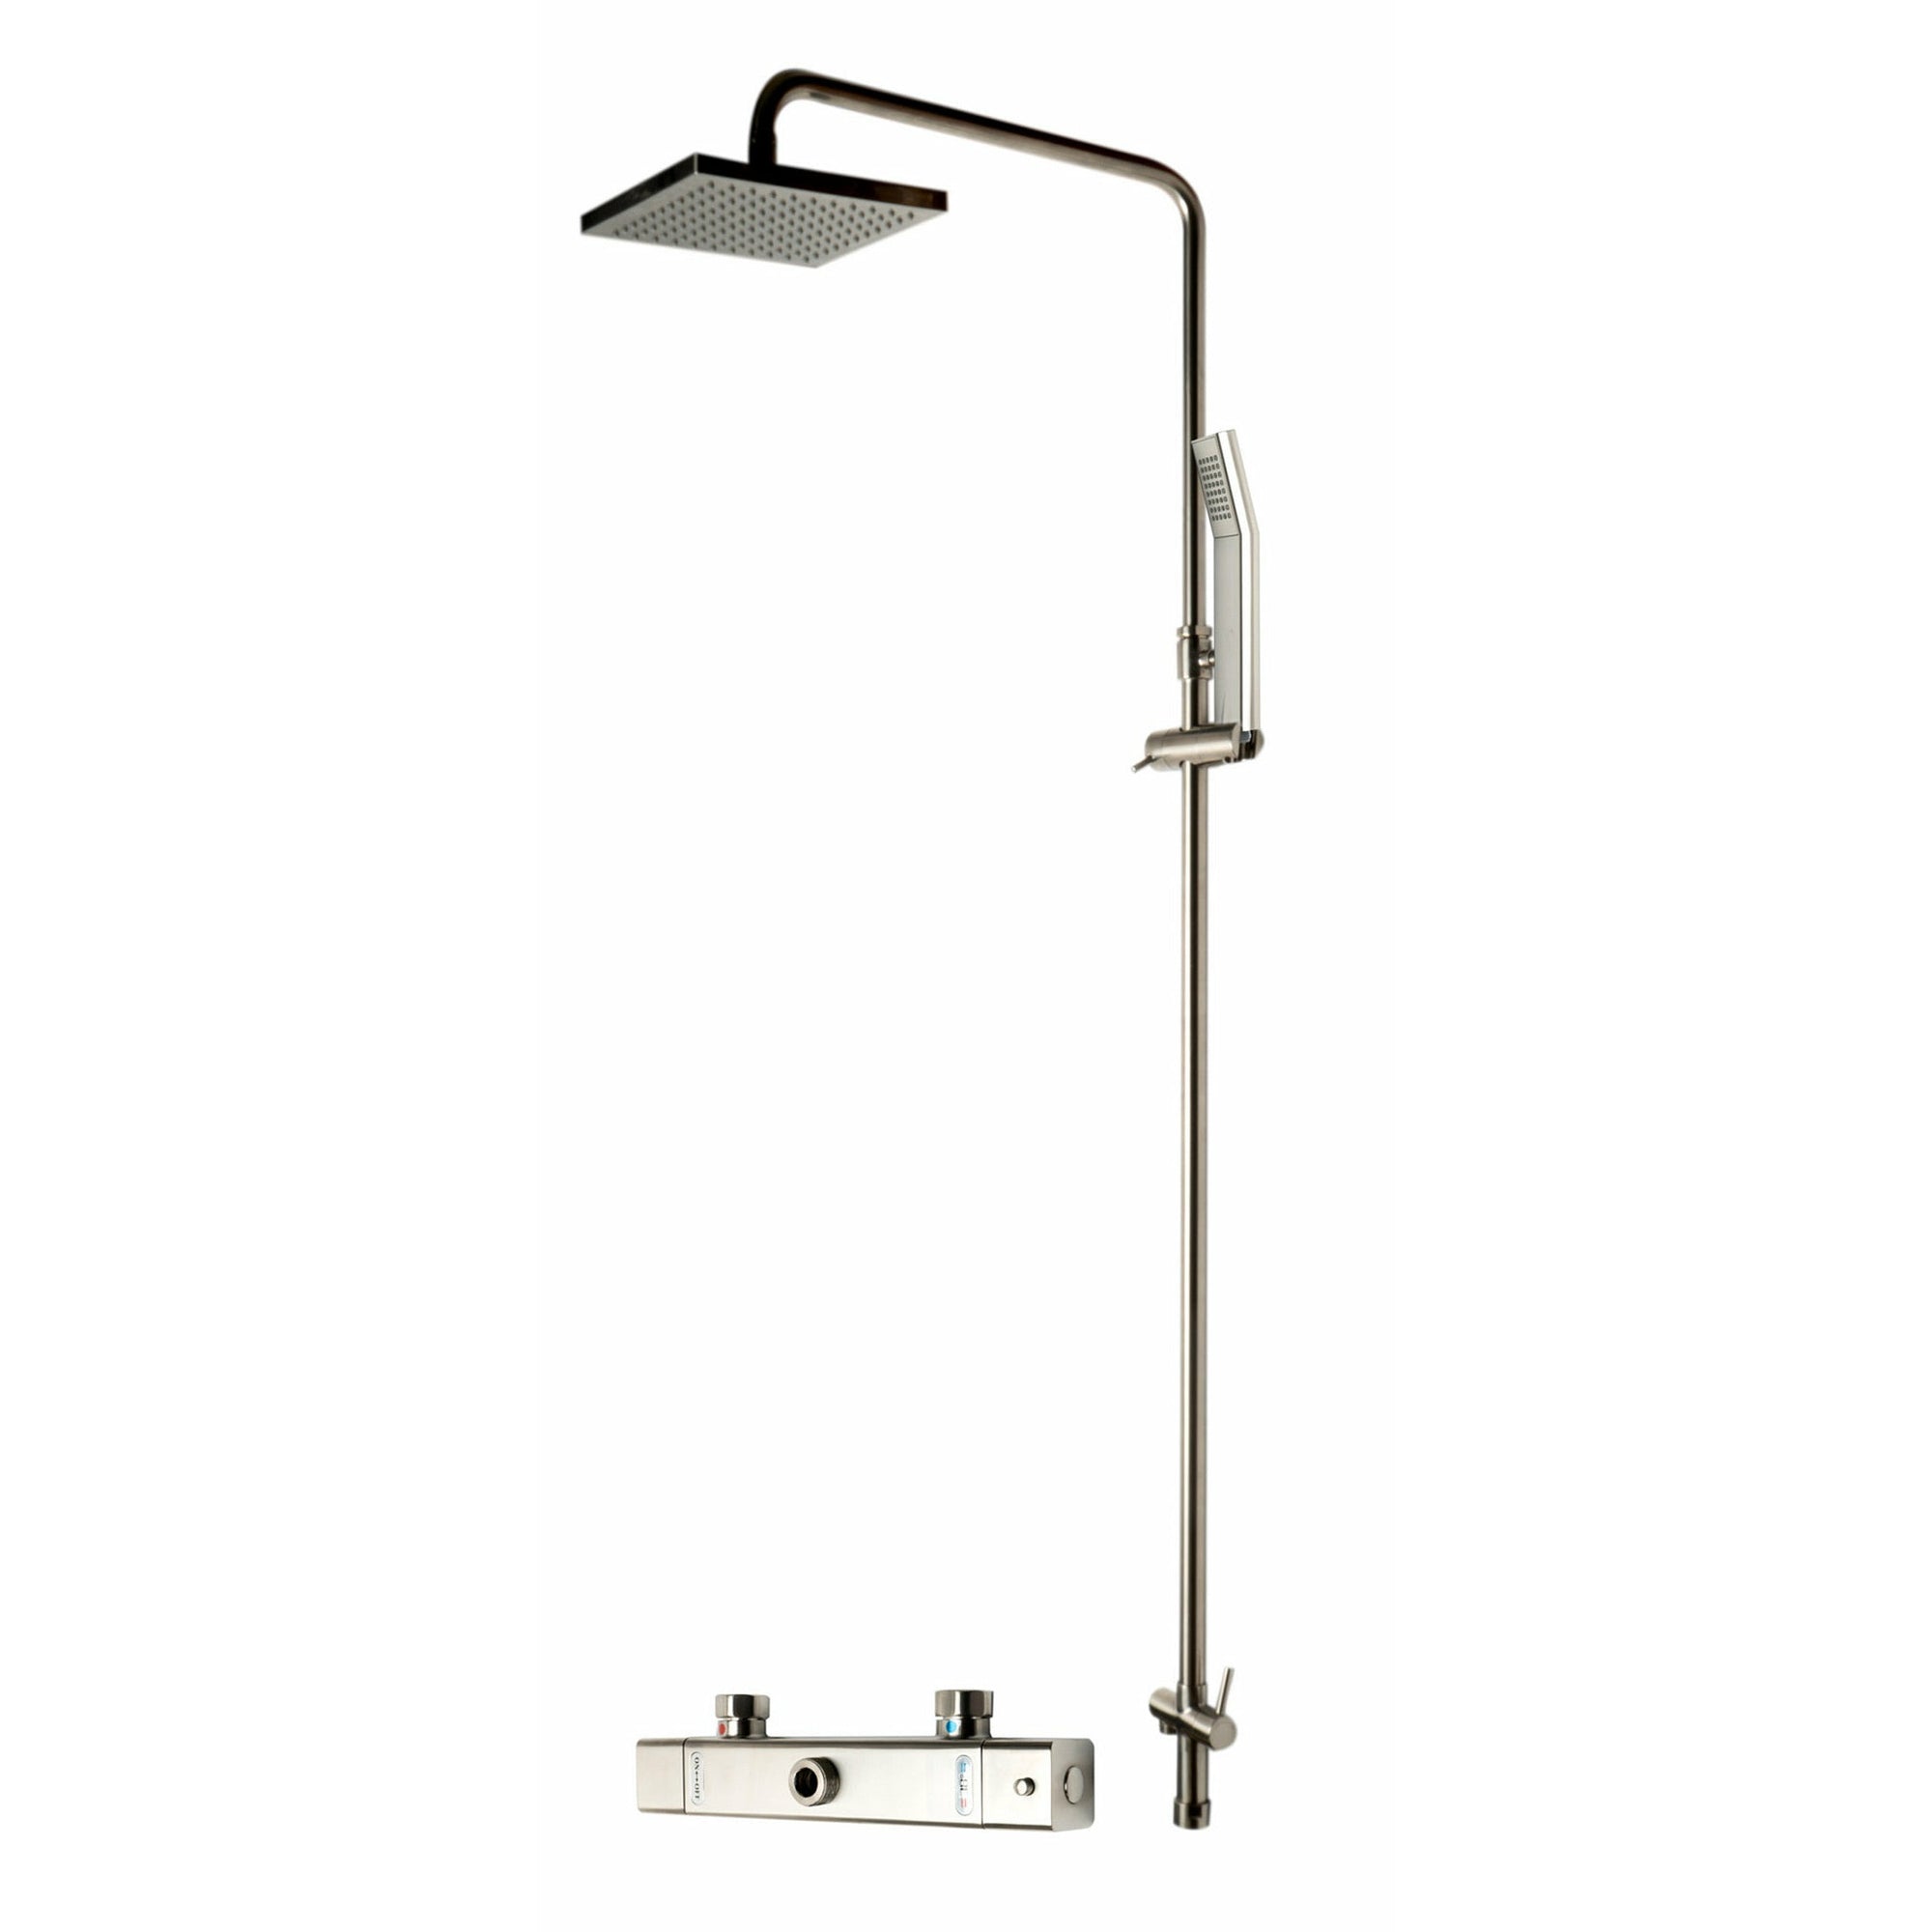 ALFI AB2862-BN Brushed Nickel Square Style Thermostatic Exposed Shower Set with Water Diverter, Temperature Control, On/Off Control, Rain Showerhead, Handheld Showerhead in a white background.